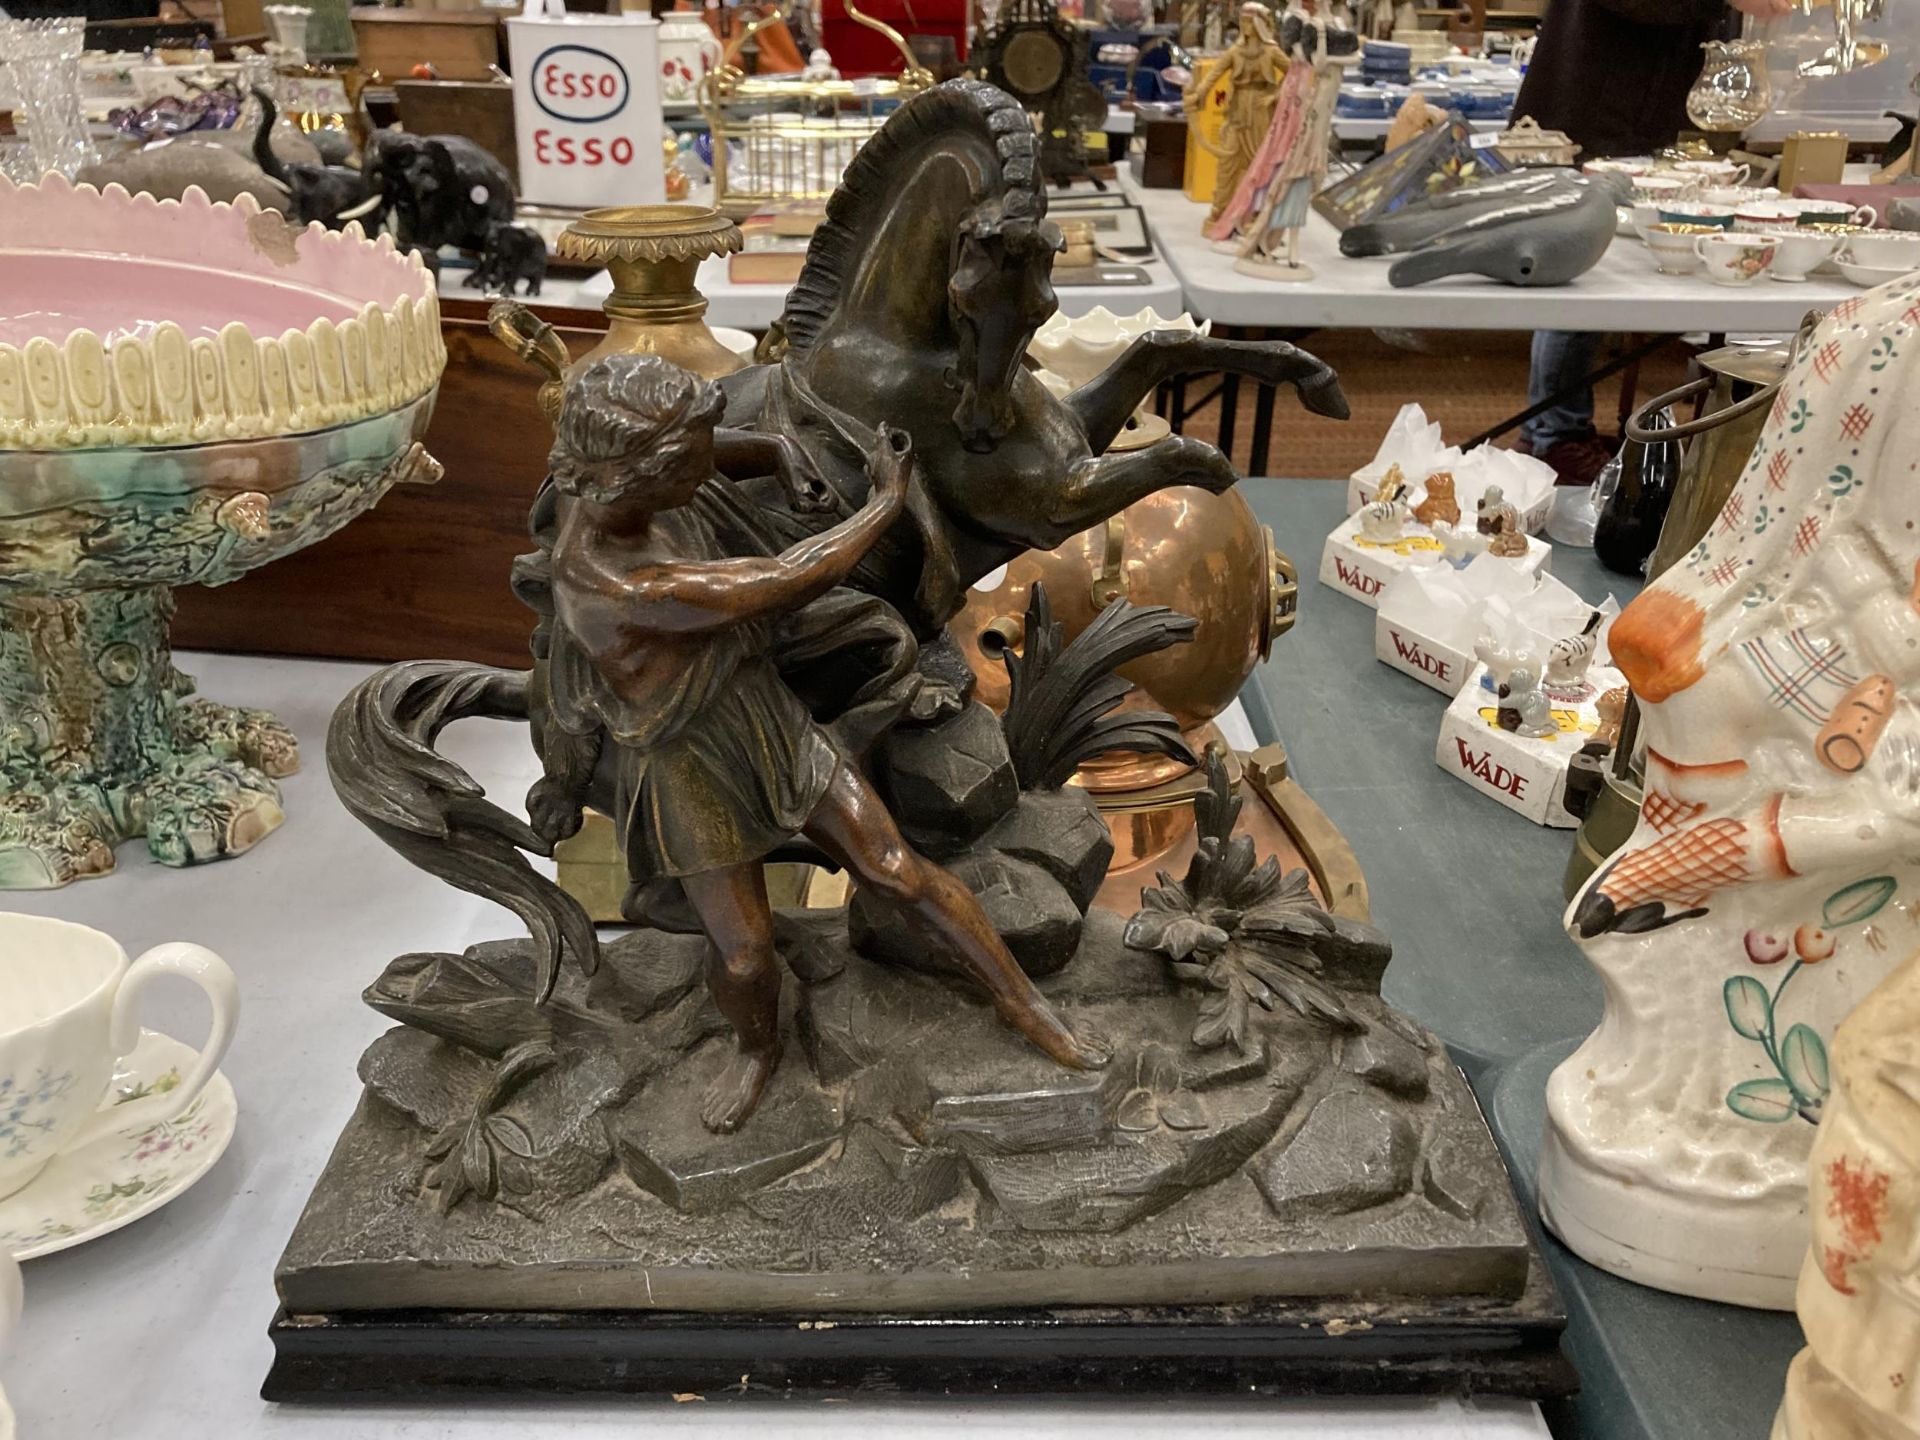 A VERY HEAVY FRENCH SPELTER FIGURE OF A MAN AND HORSE ON A WOODEN BASE, HEIGHT 33CM, LENGTH 35CM -